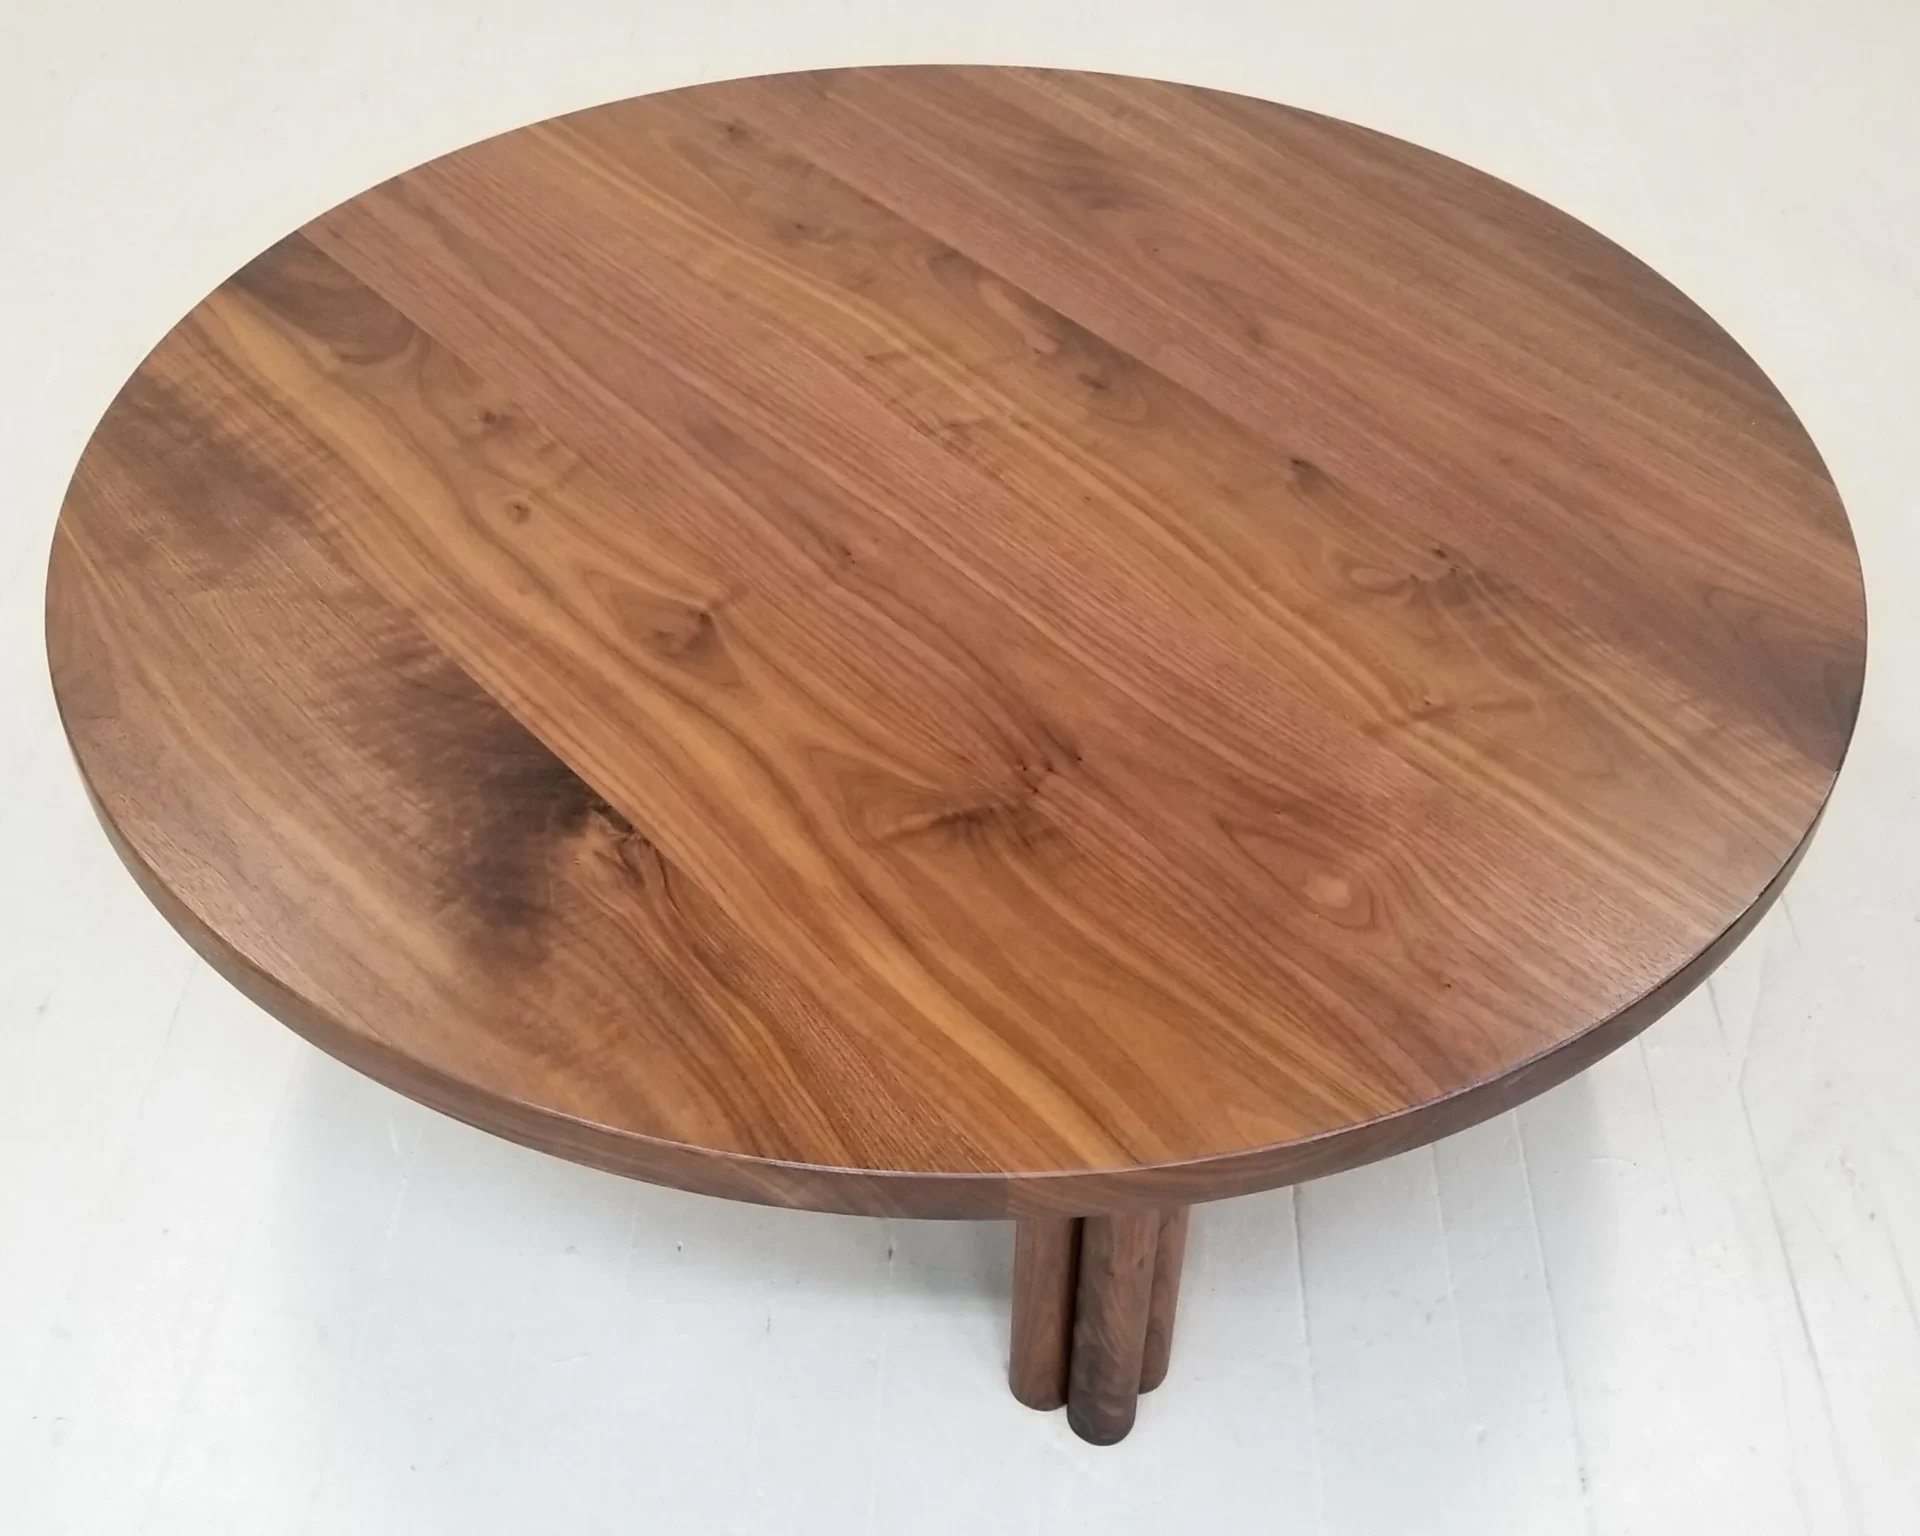 A wooden round coffee table with four legs on top of it.